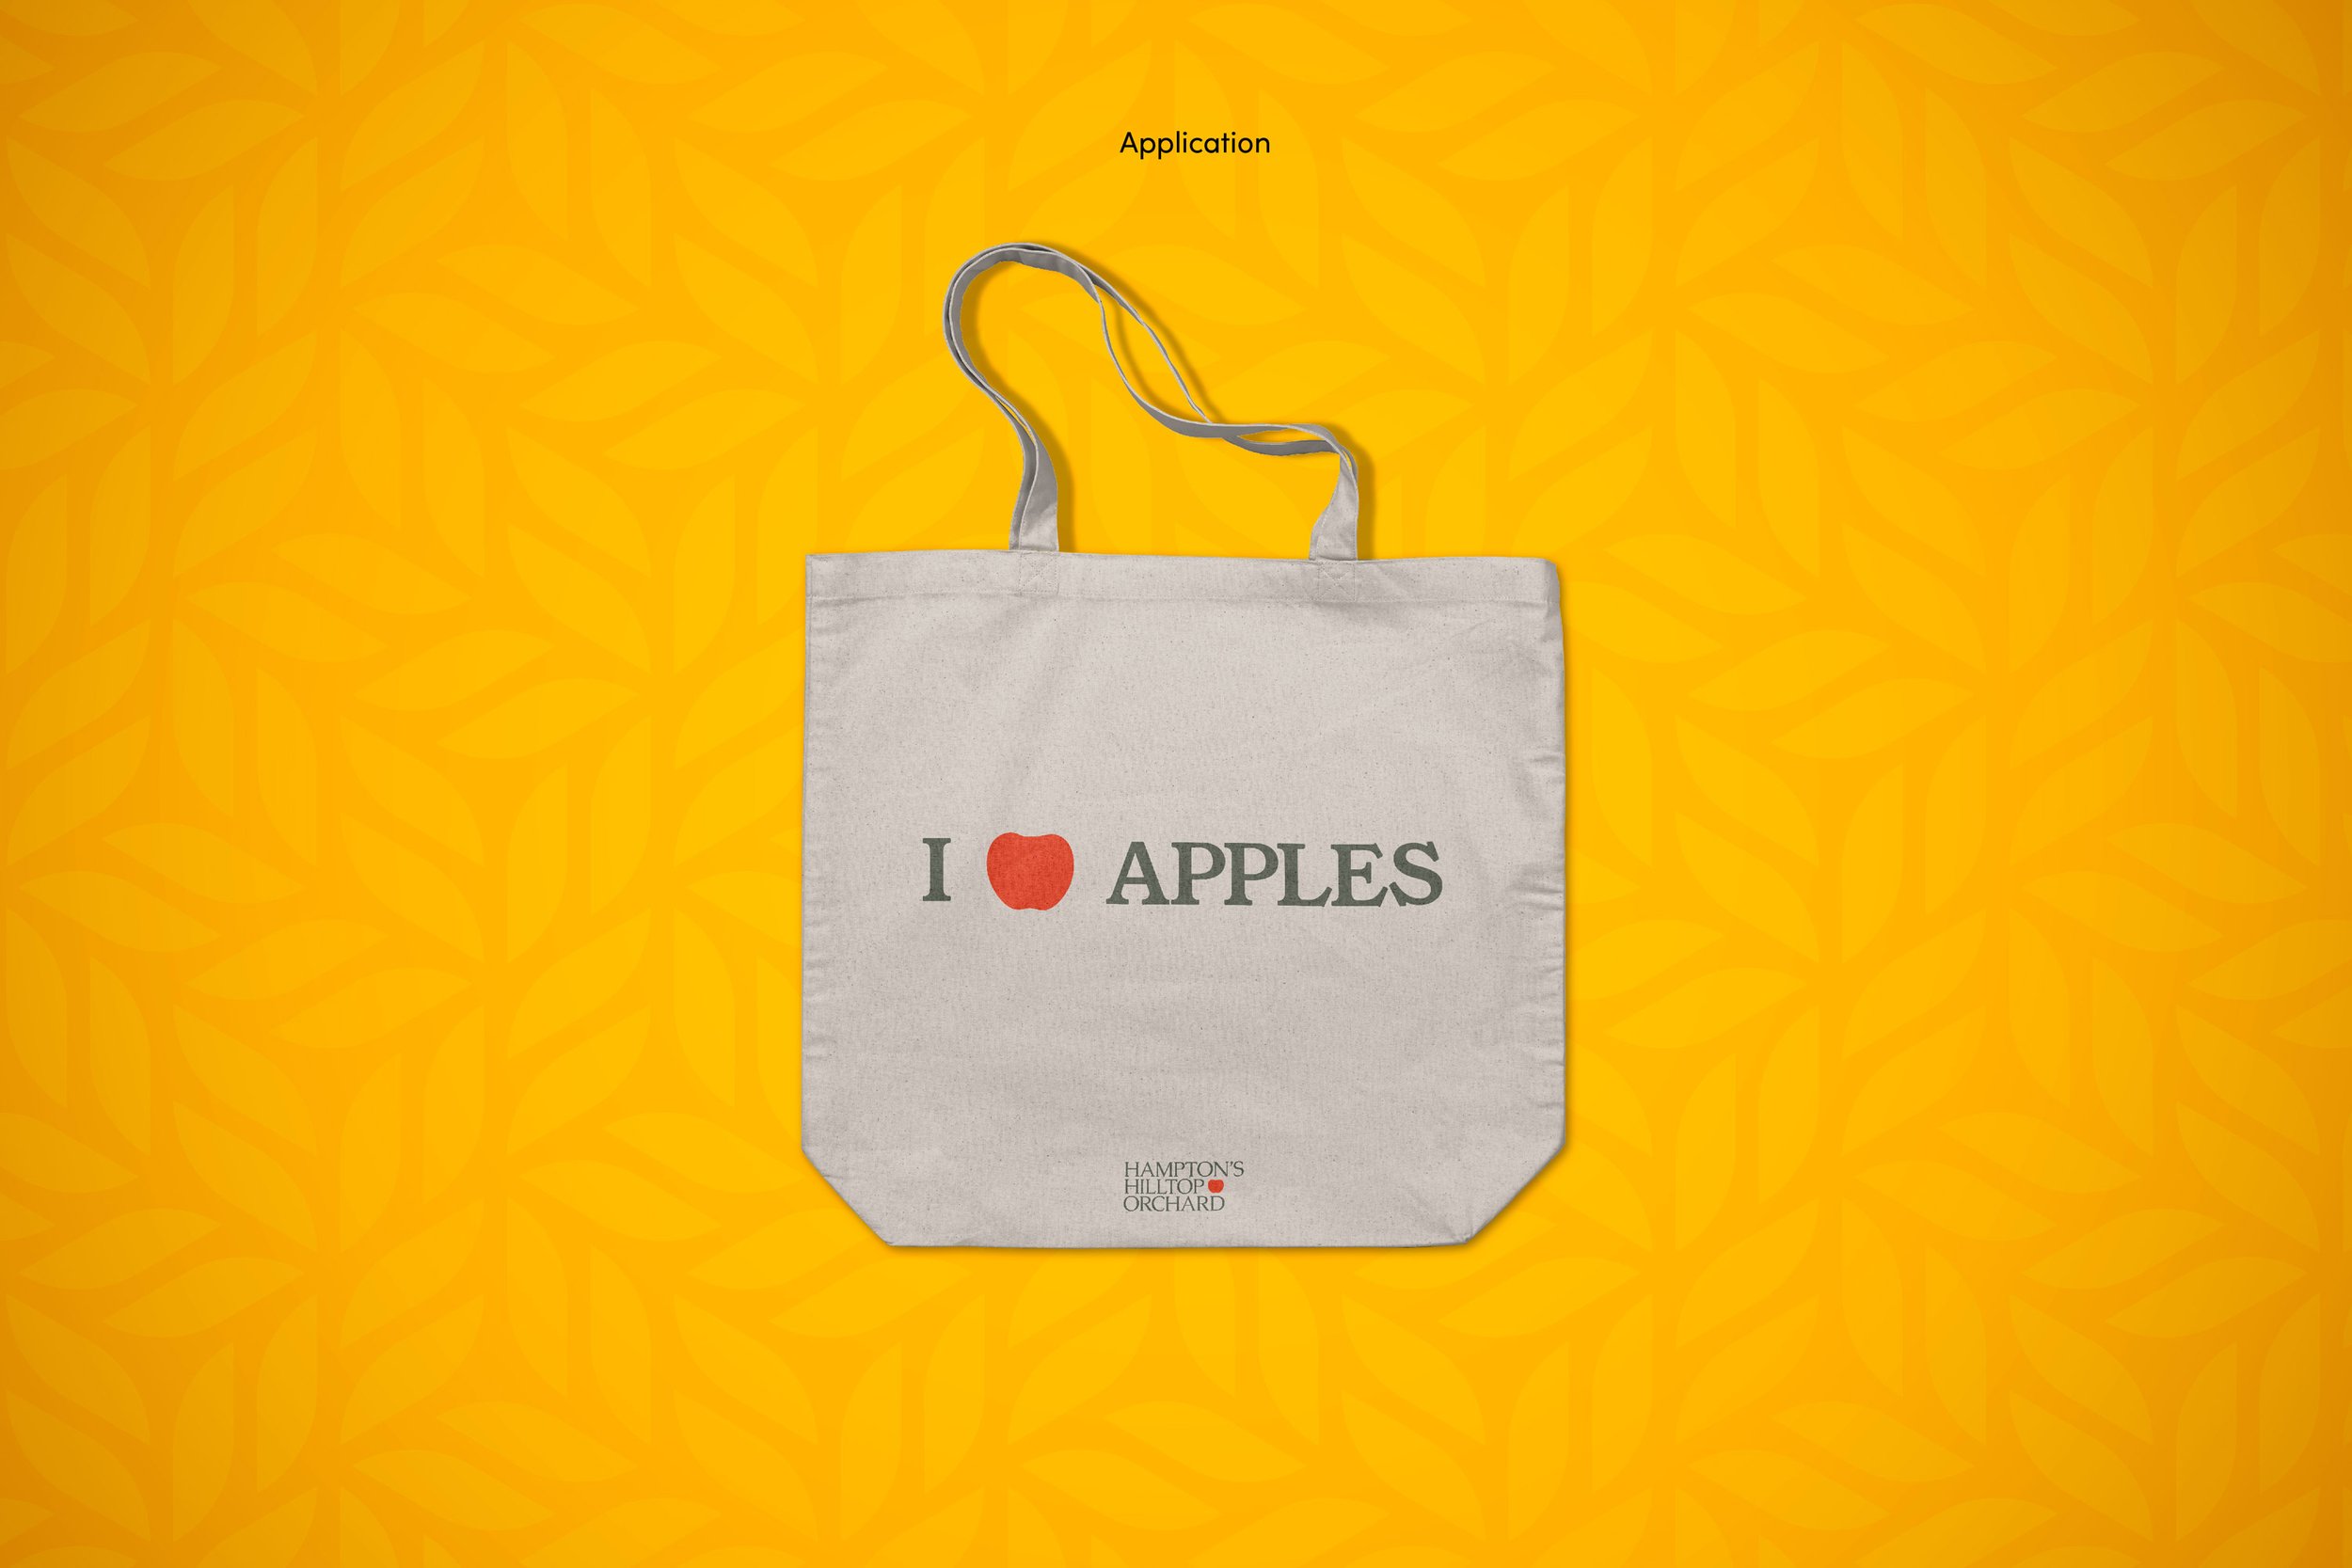  Tote bag mock-up for farmers market vendor that reads “I [heart] apples” where the heart is Hampton’s Hilltop Orchard logo. 